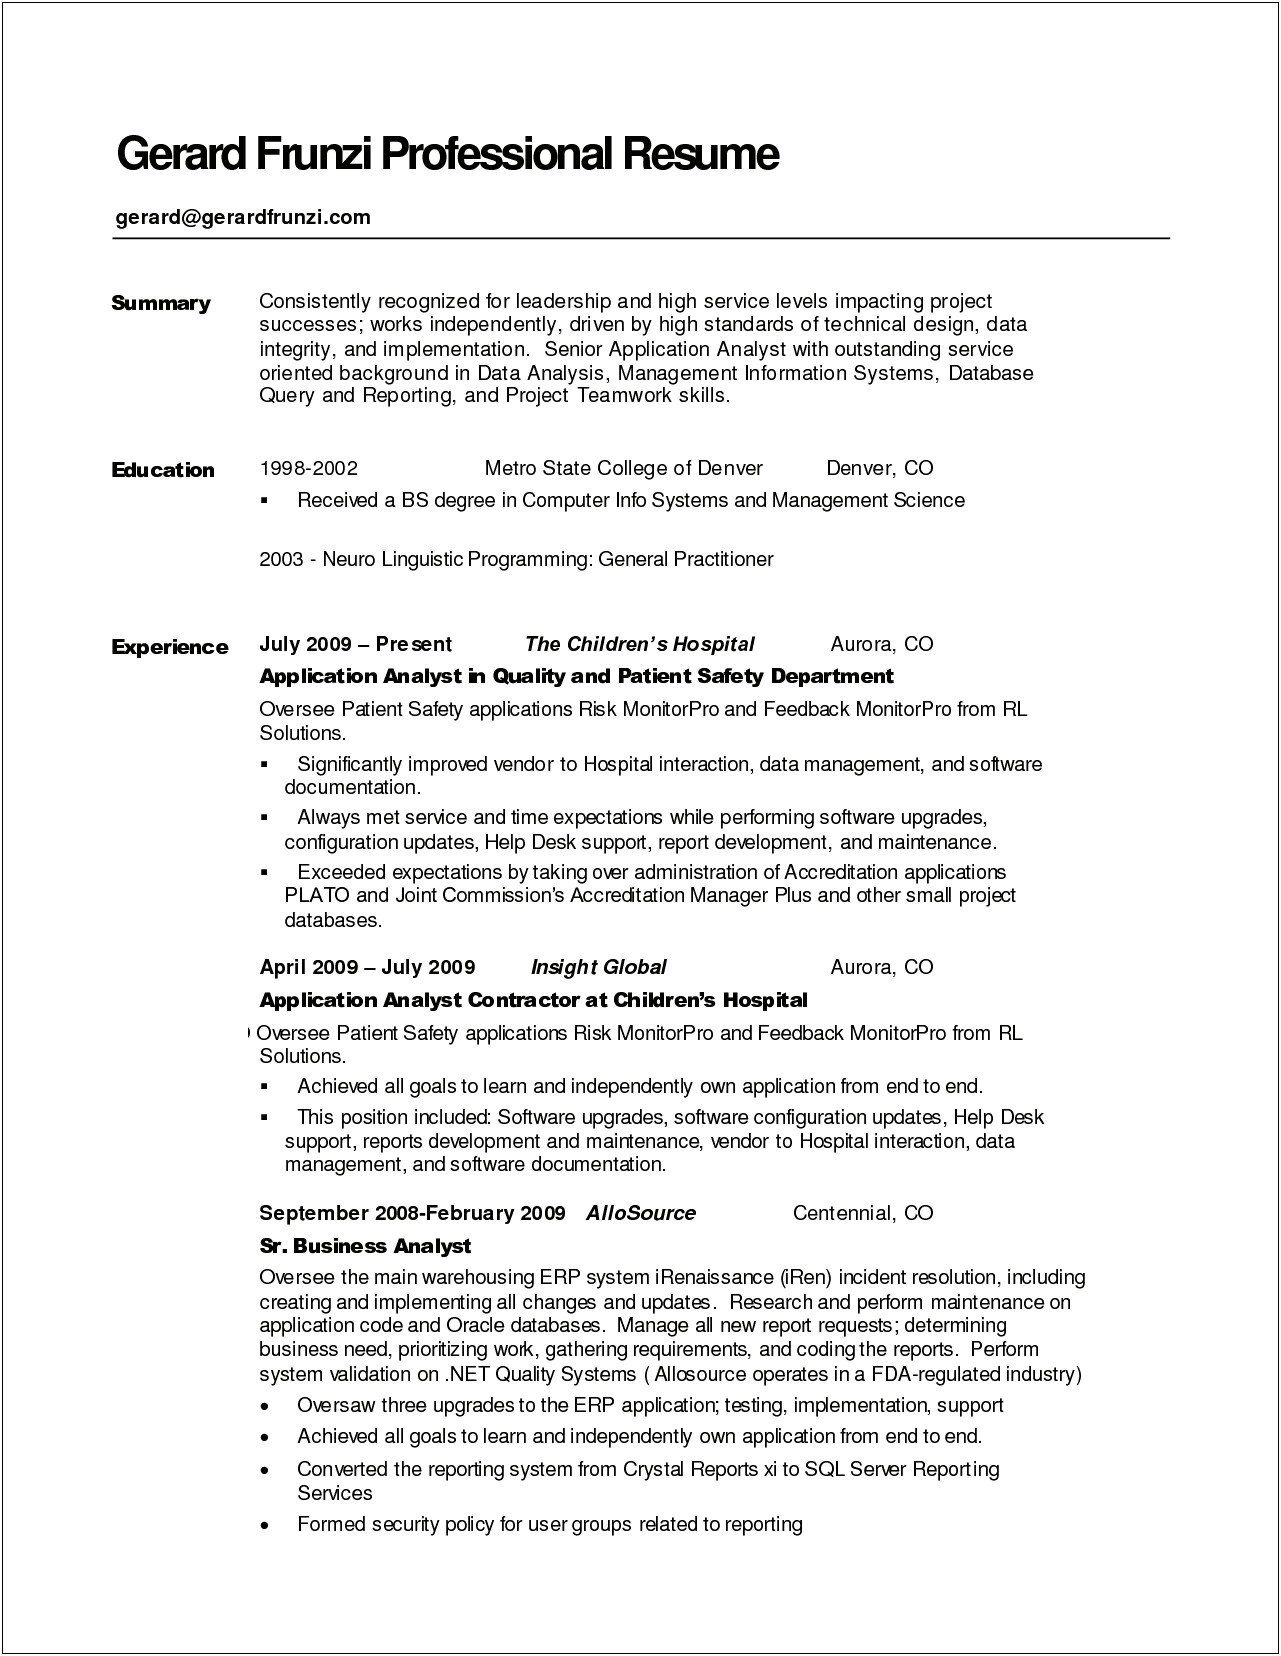 Adding An Introduction Summary For Resume